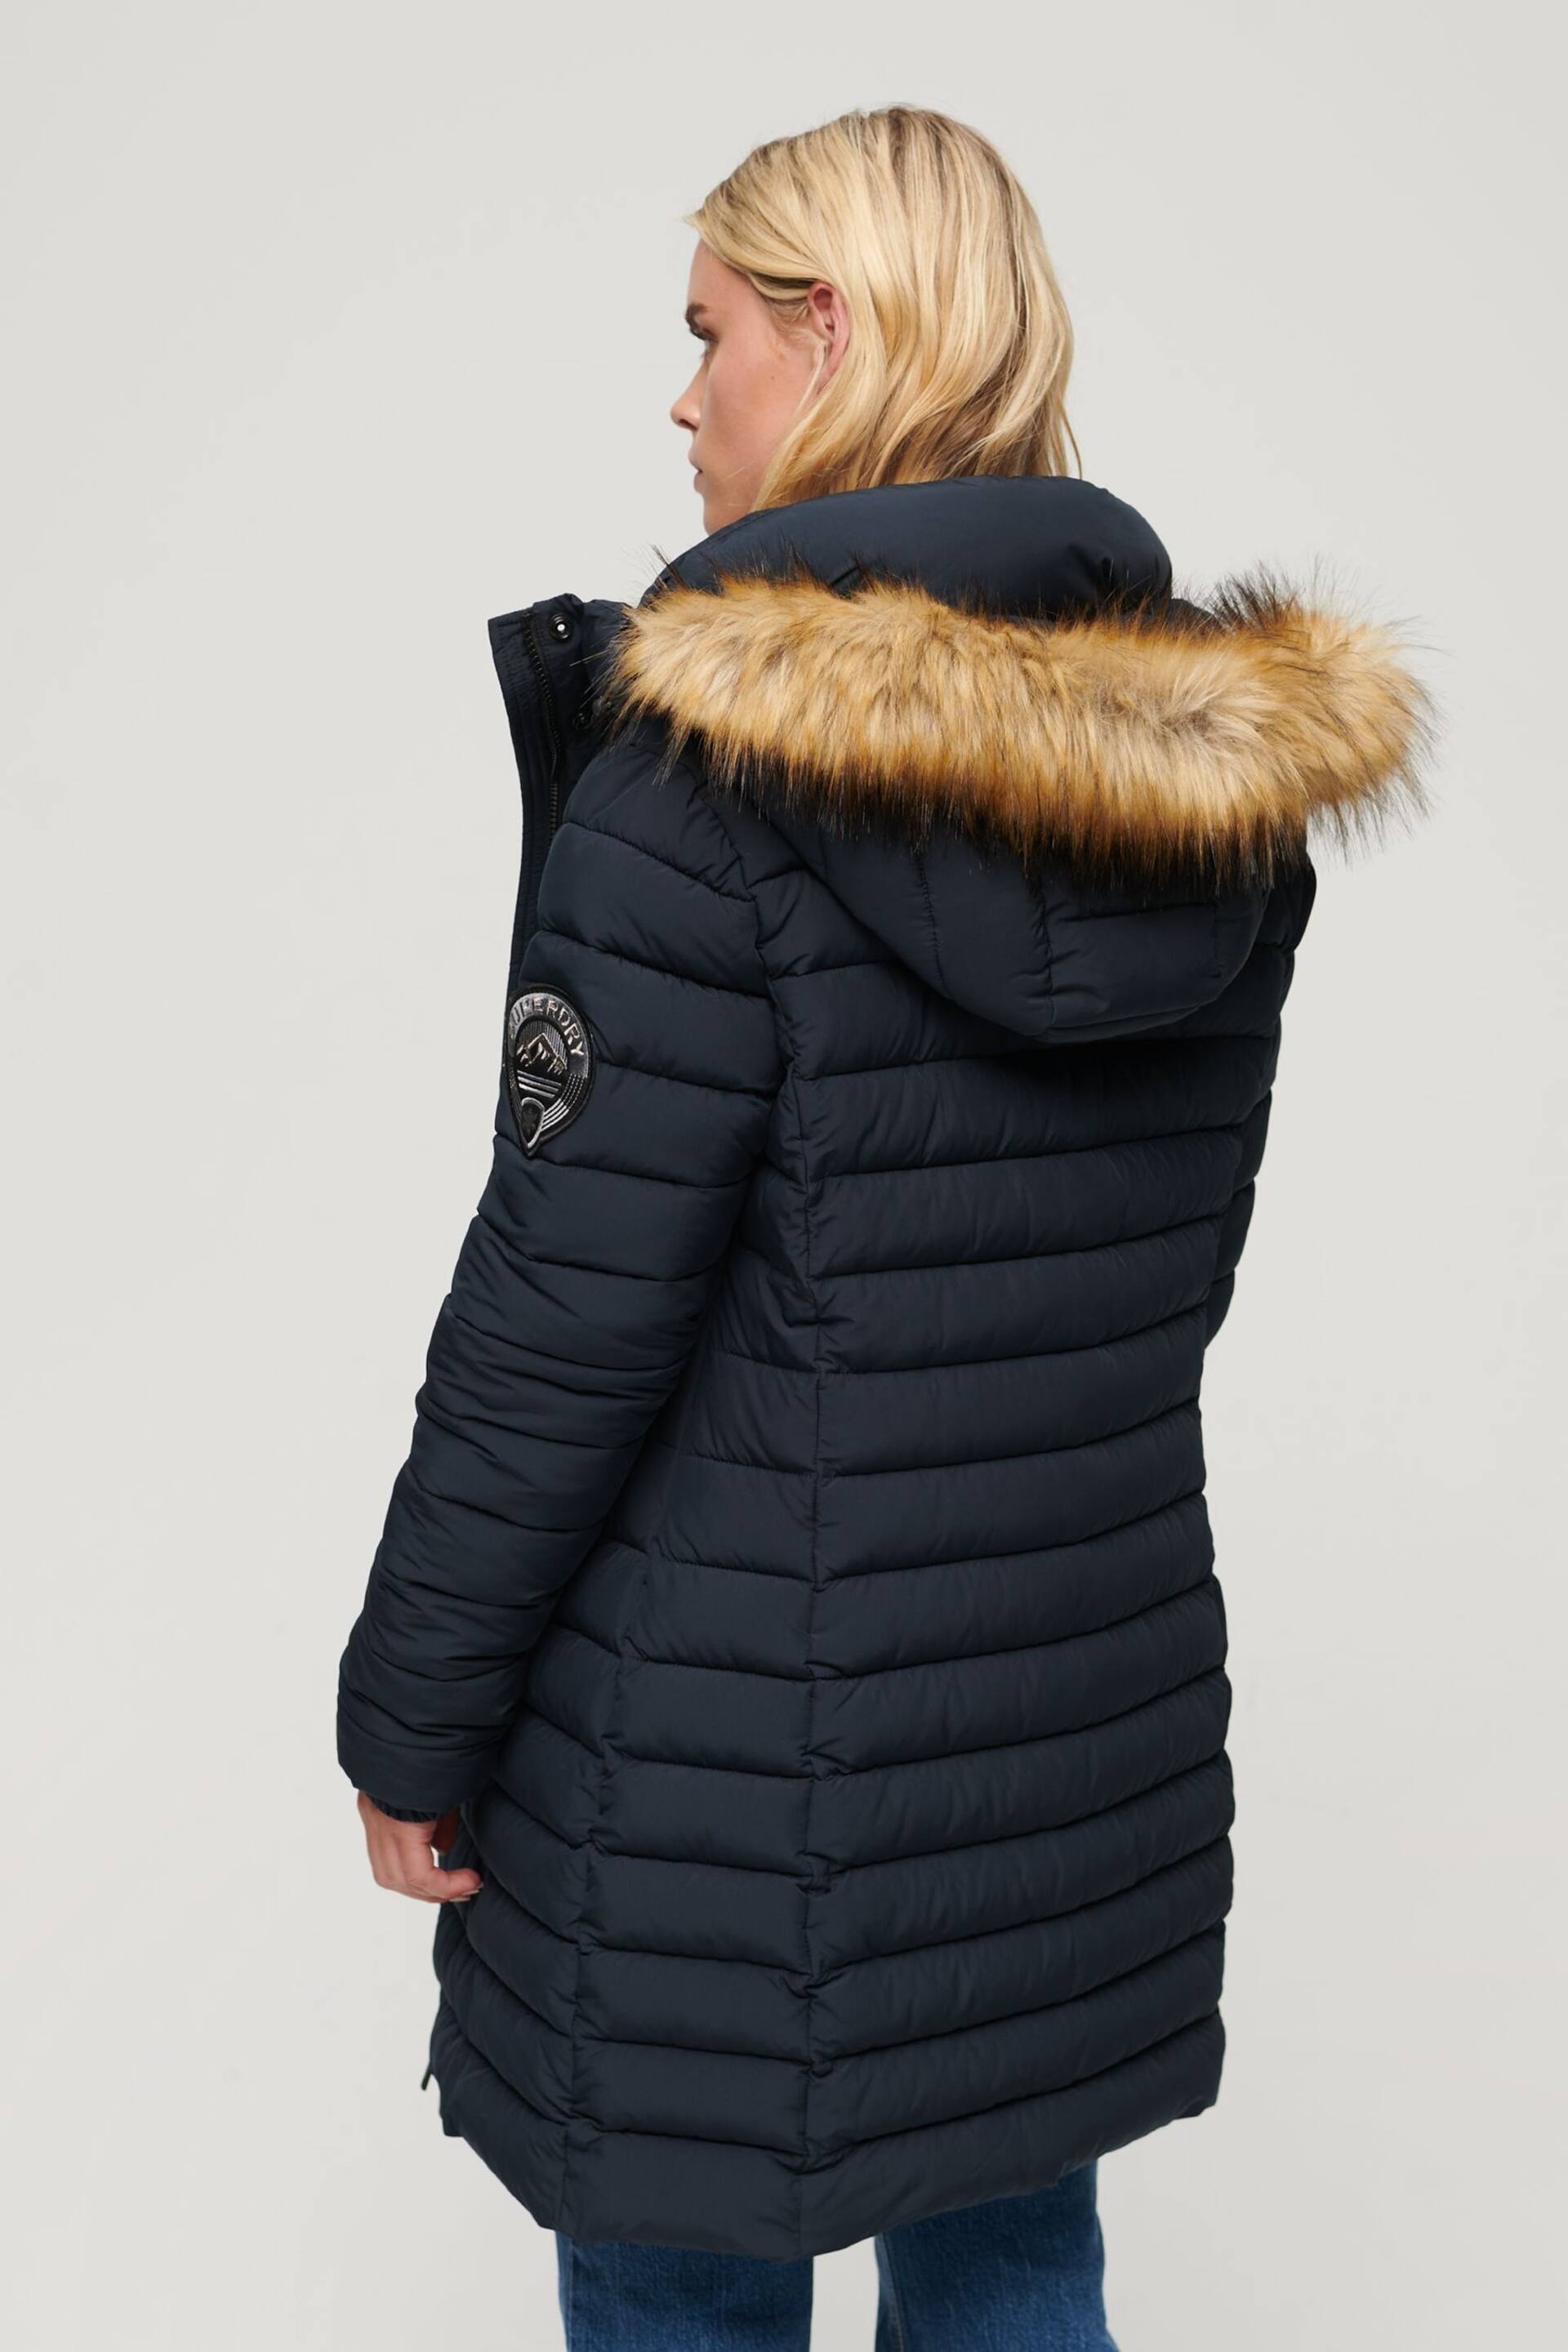 Superdry Blue Fuji Hooded Mid Length Puffer Jacket - Image 2 of 7